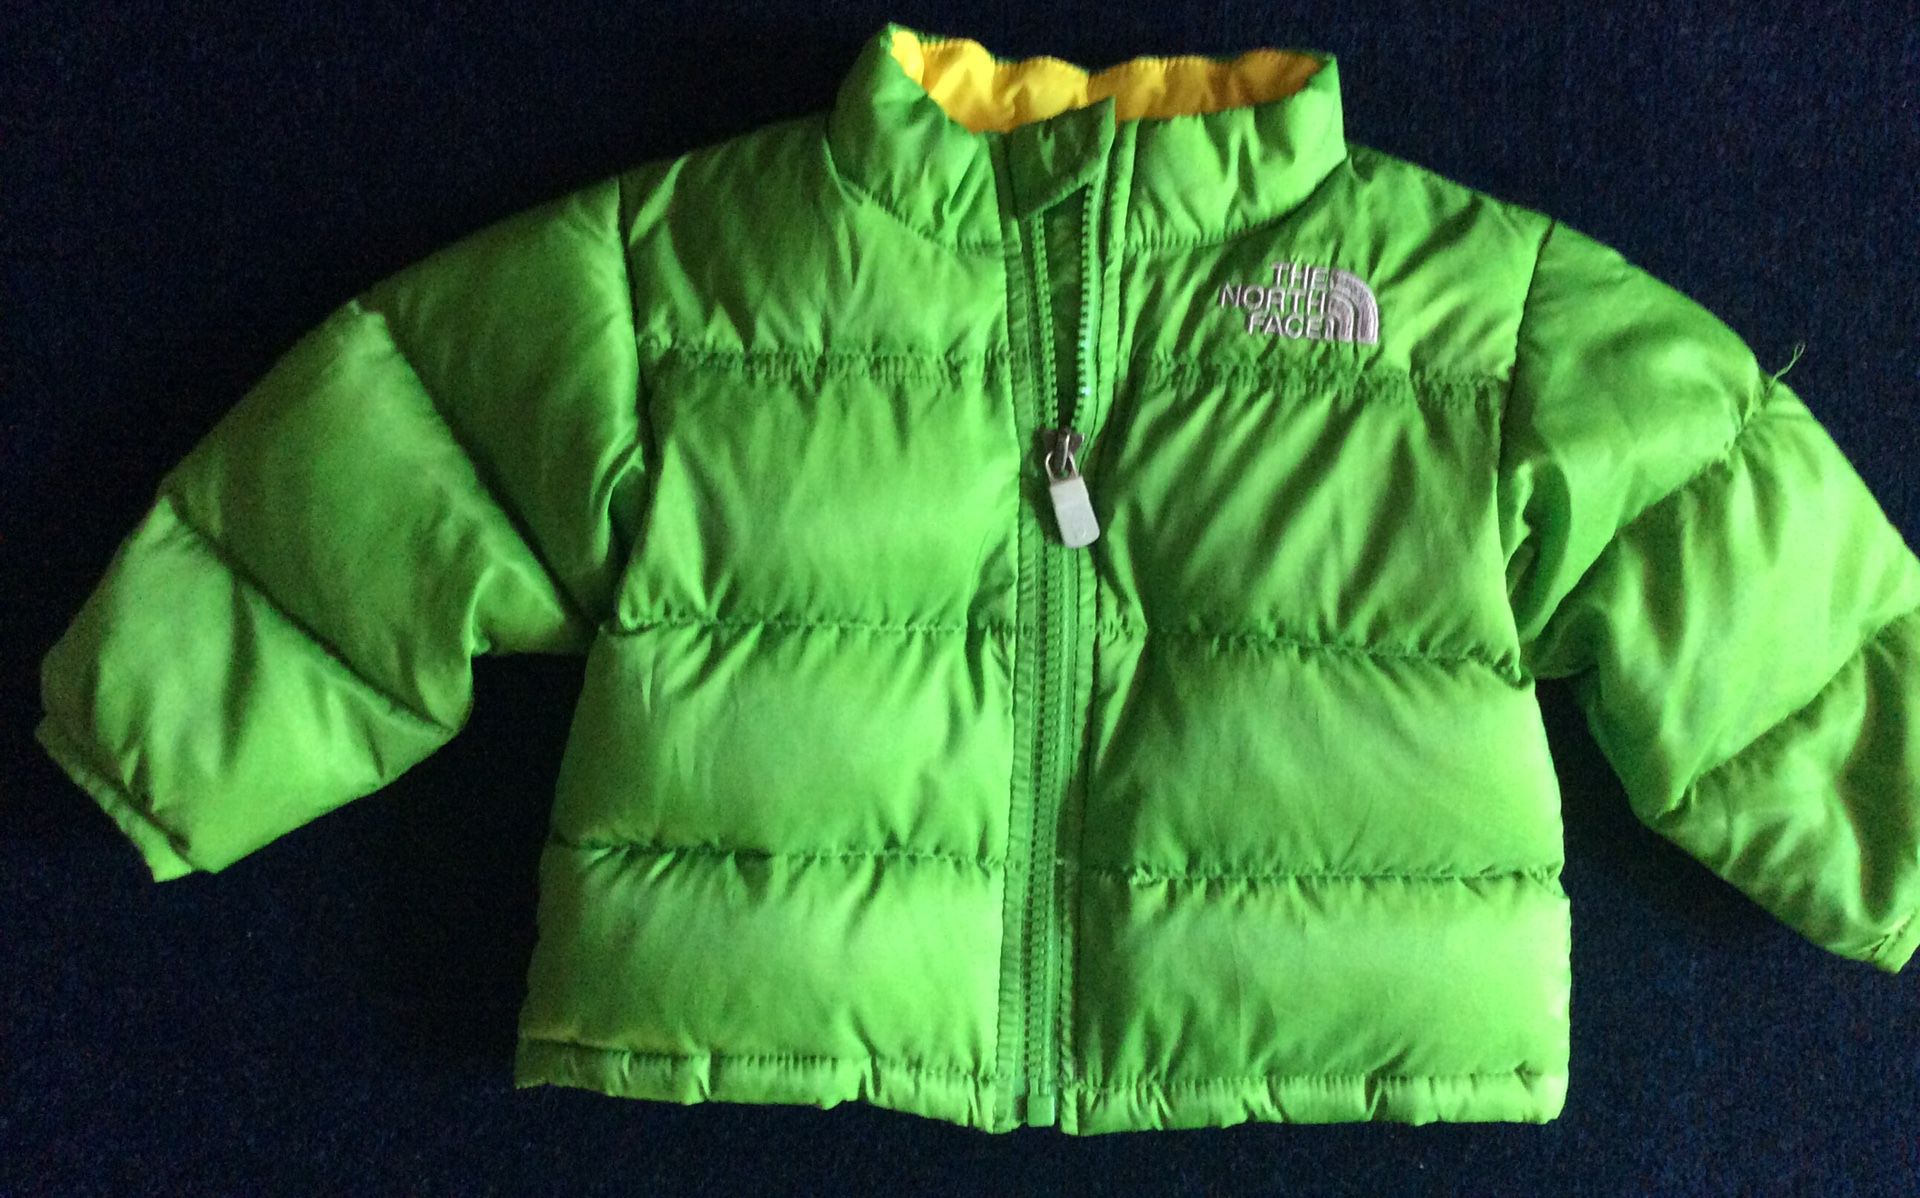 North Face Baby coat-size 3- 6 months-$30 firm-comment only when ready to see or buy,Thanks